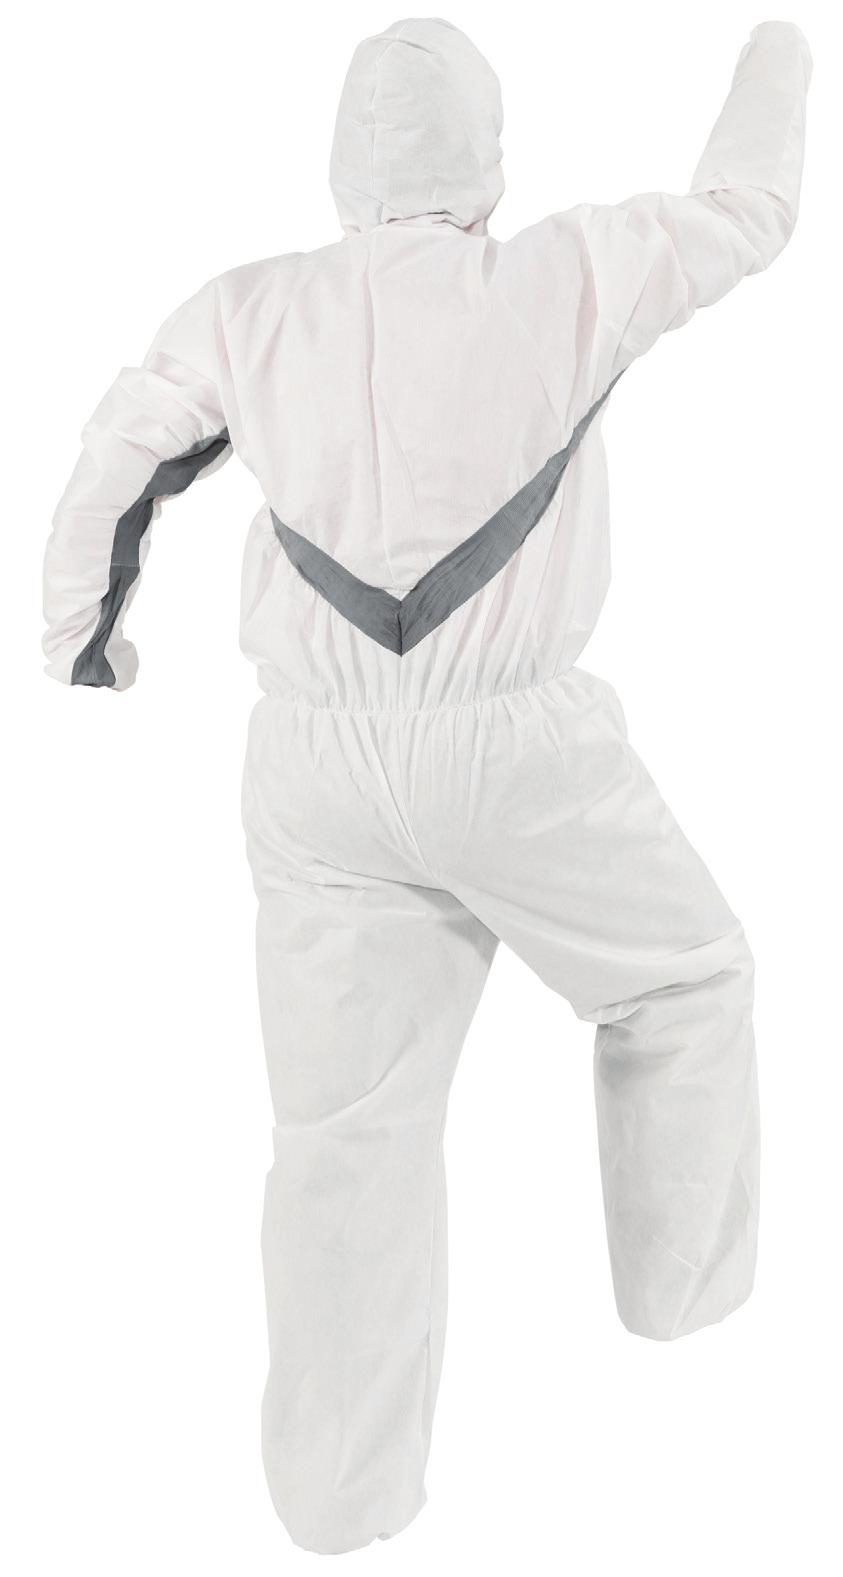 A Breathable plash & Particle Protection Apparel with ifex * tretch Panels KEENGUARD* A Coveralls with ifex* tretch Panels Zipper Front with 1" Flap, Elastic Back & Front, Wrists & Ankles Typical